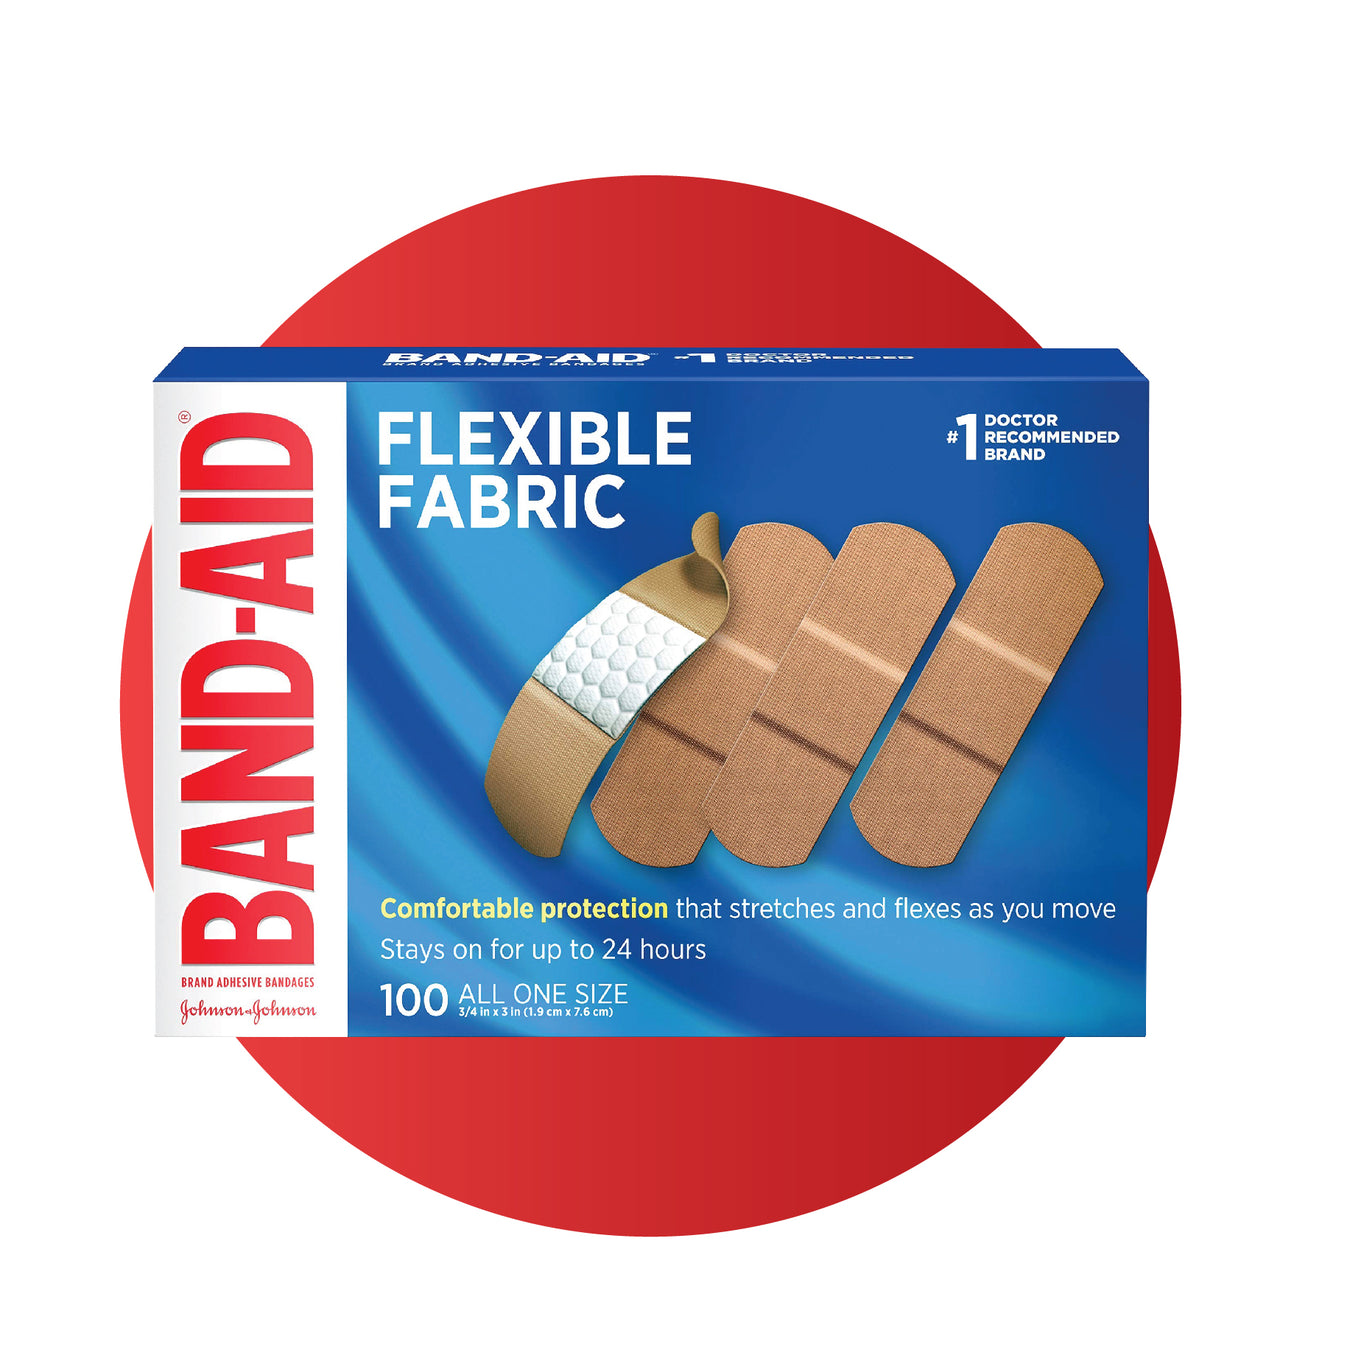 Pharmasave  Shop Online for Health, Beauty, Home & more. BAND-AID